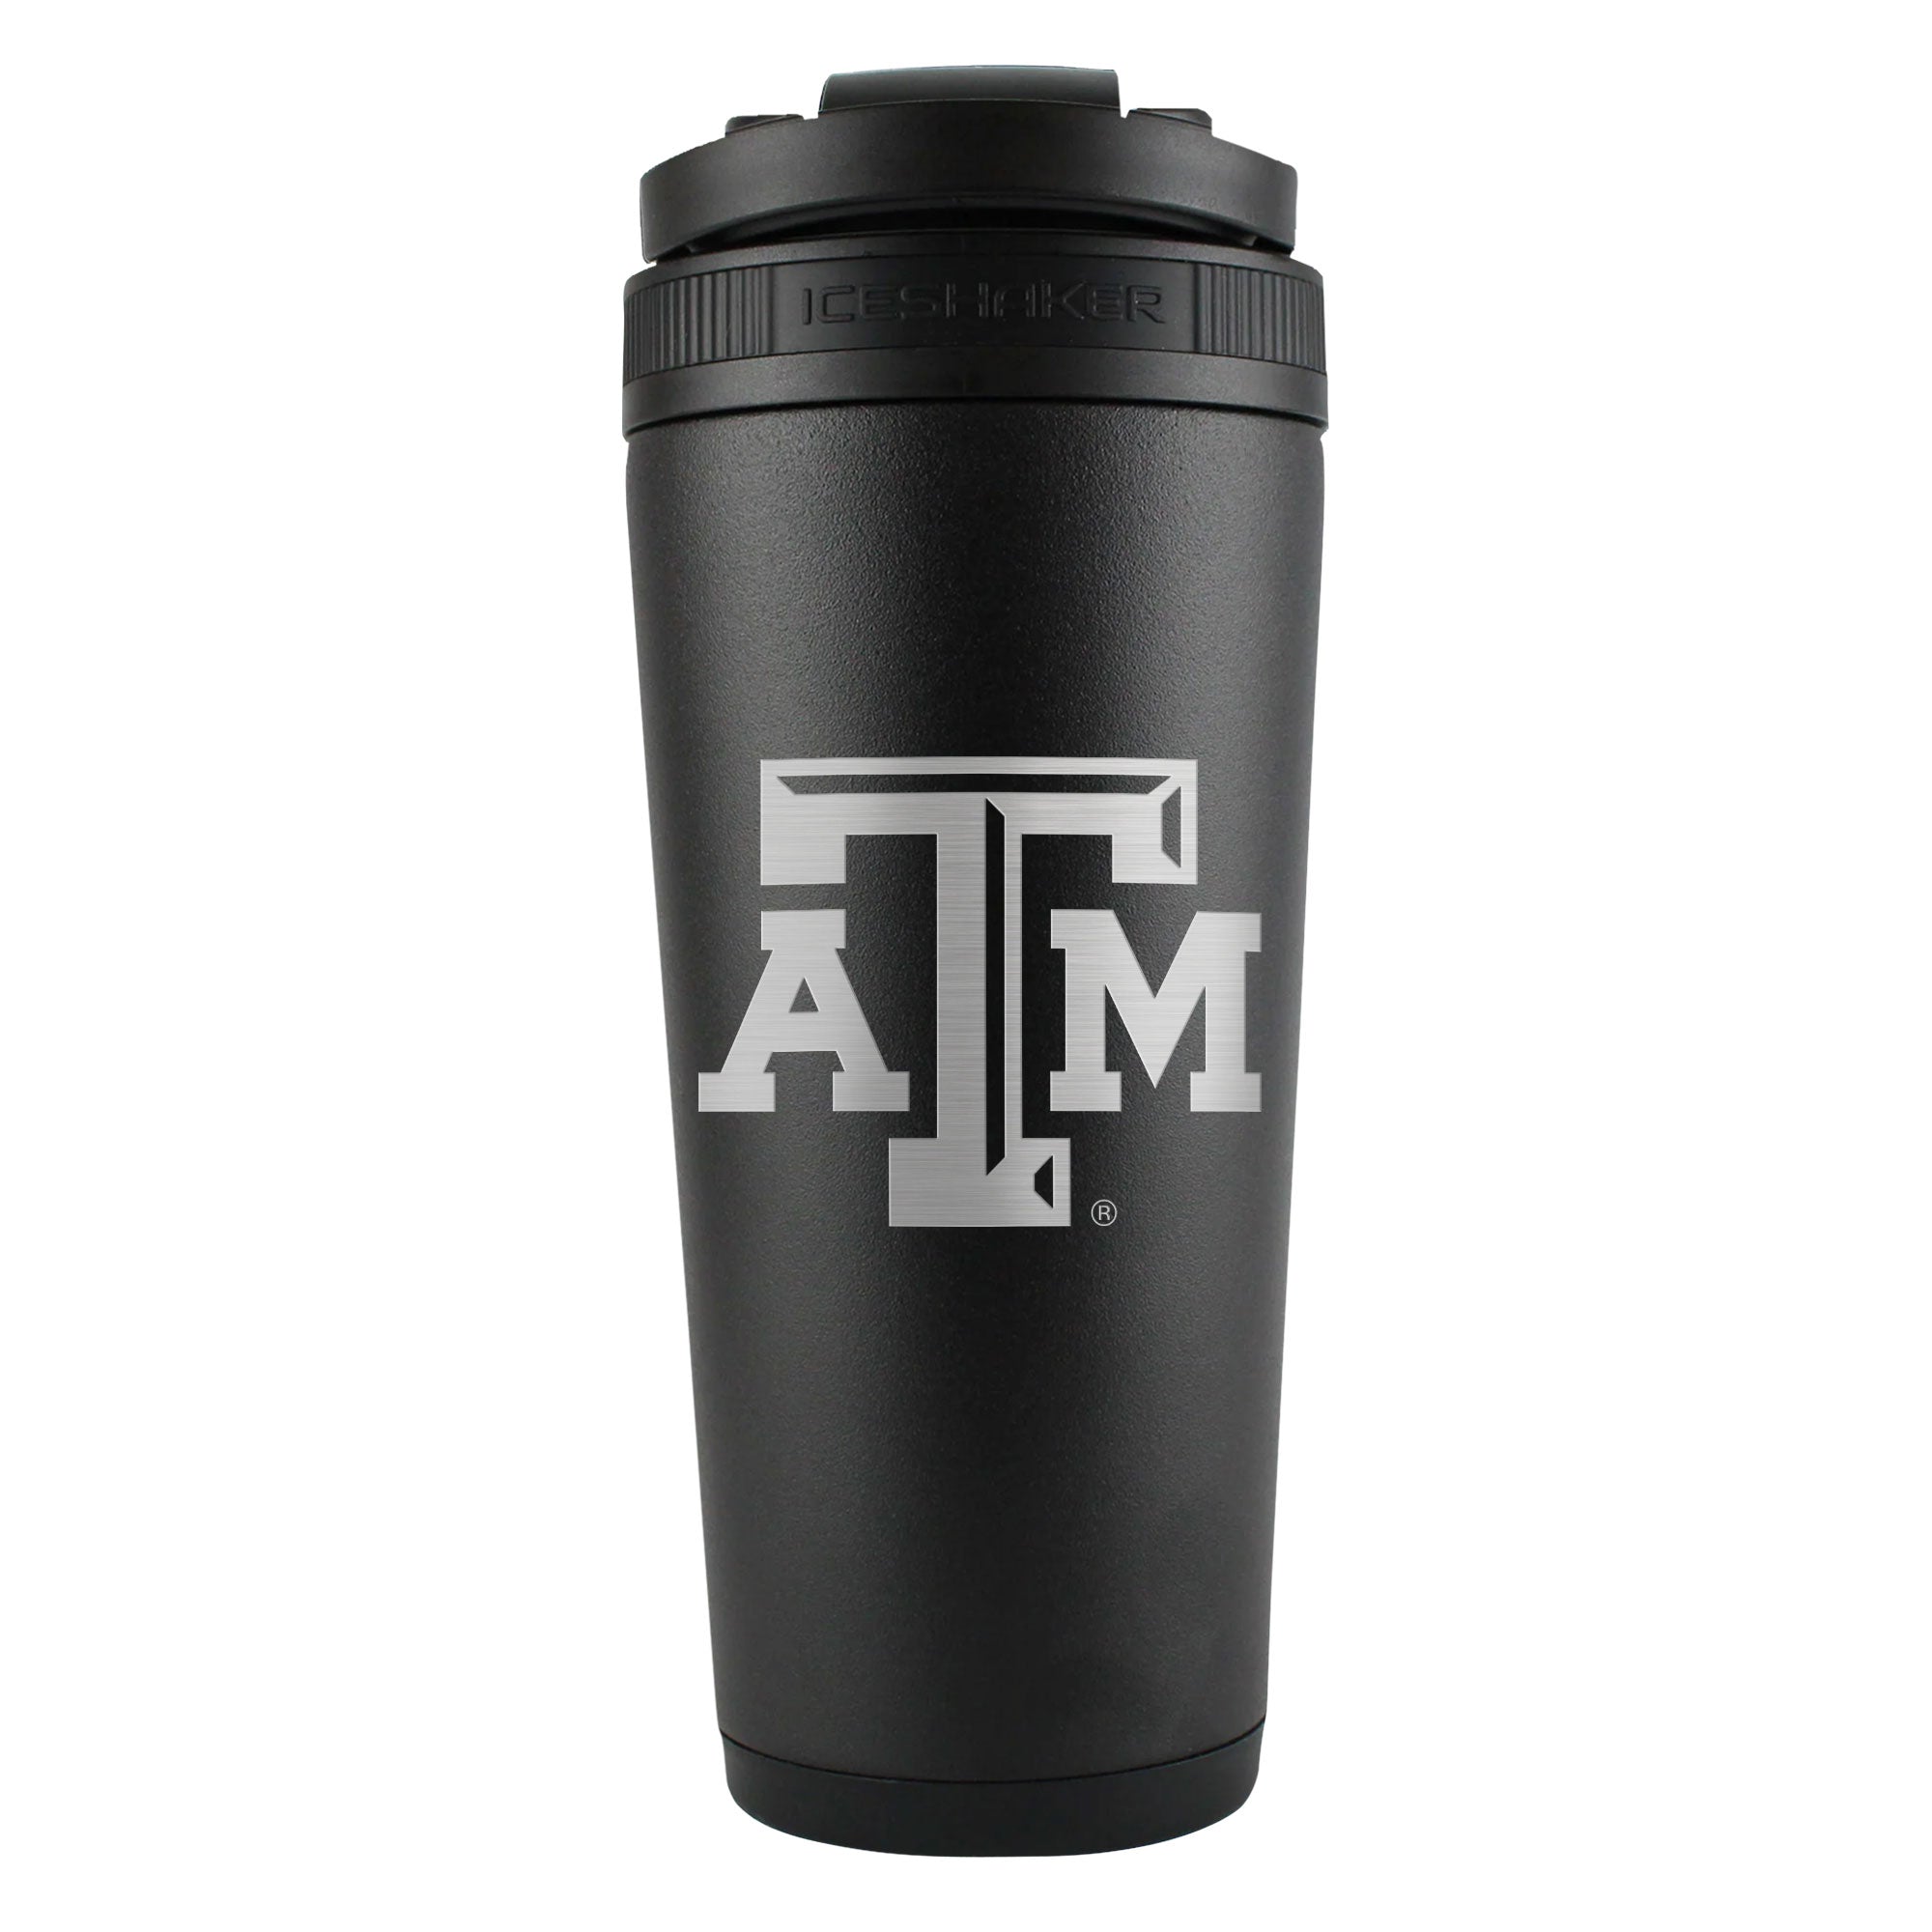 Officially Licensed Texas A&M University 26oz Ice Shaker - Black